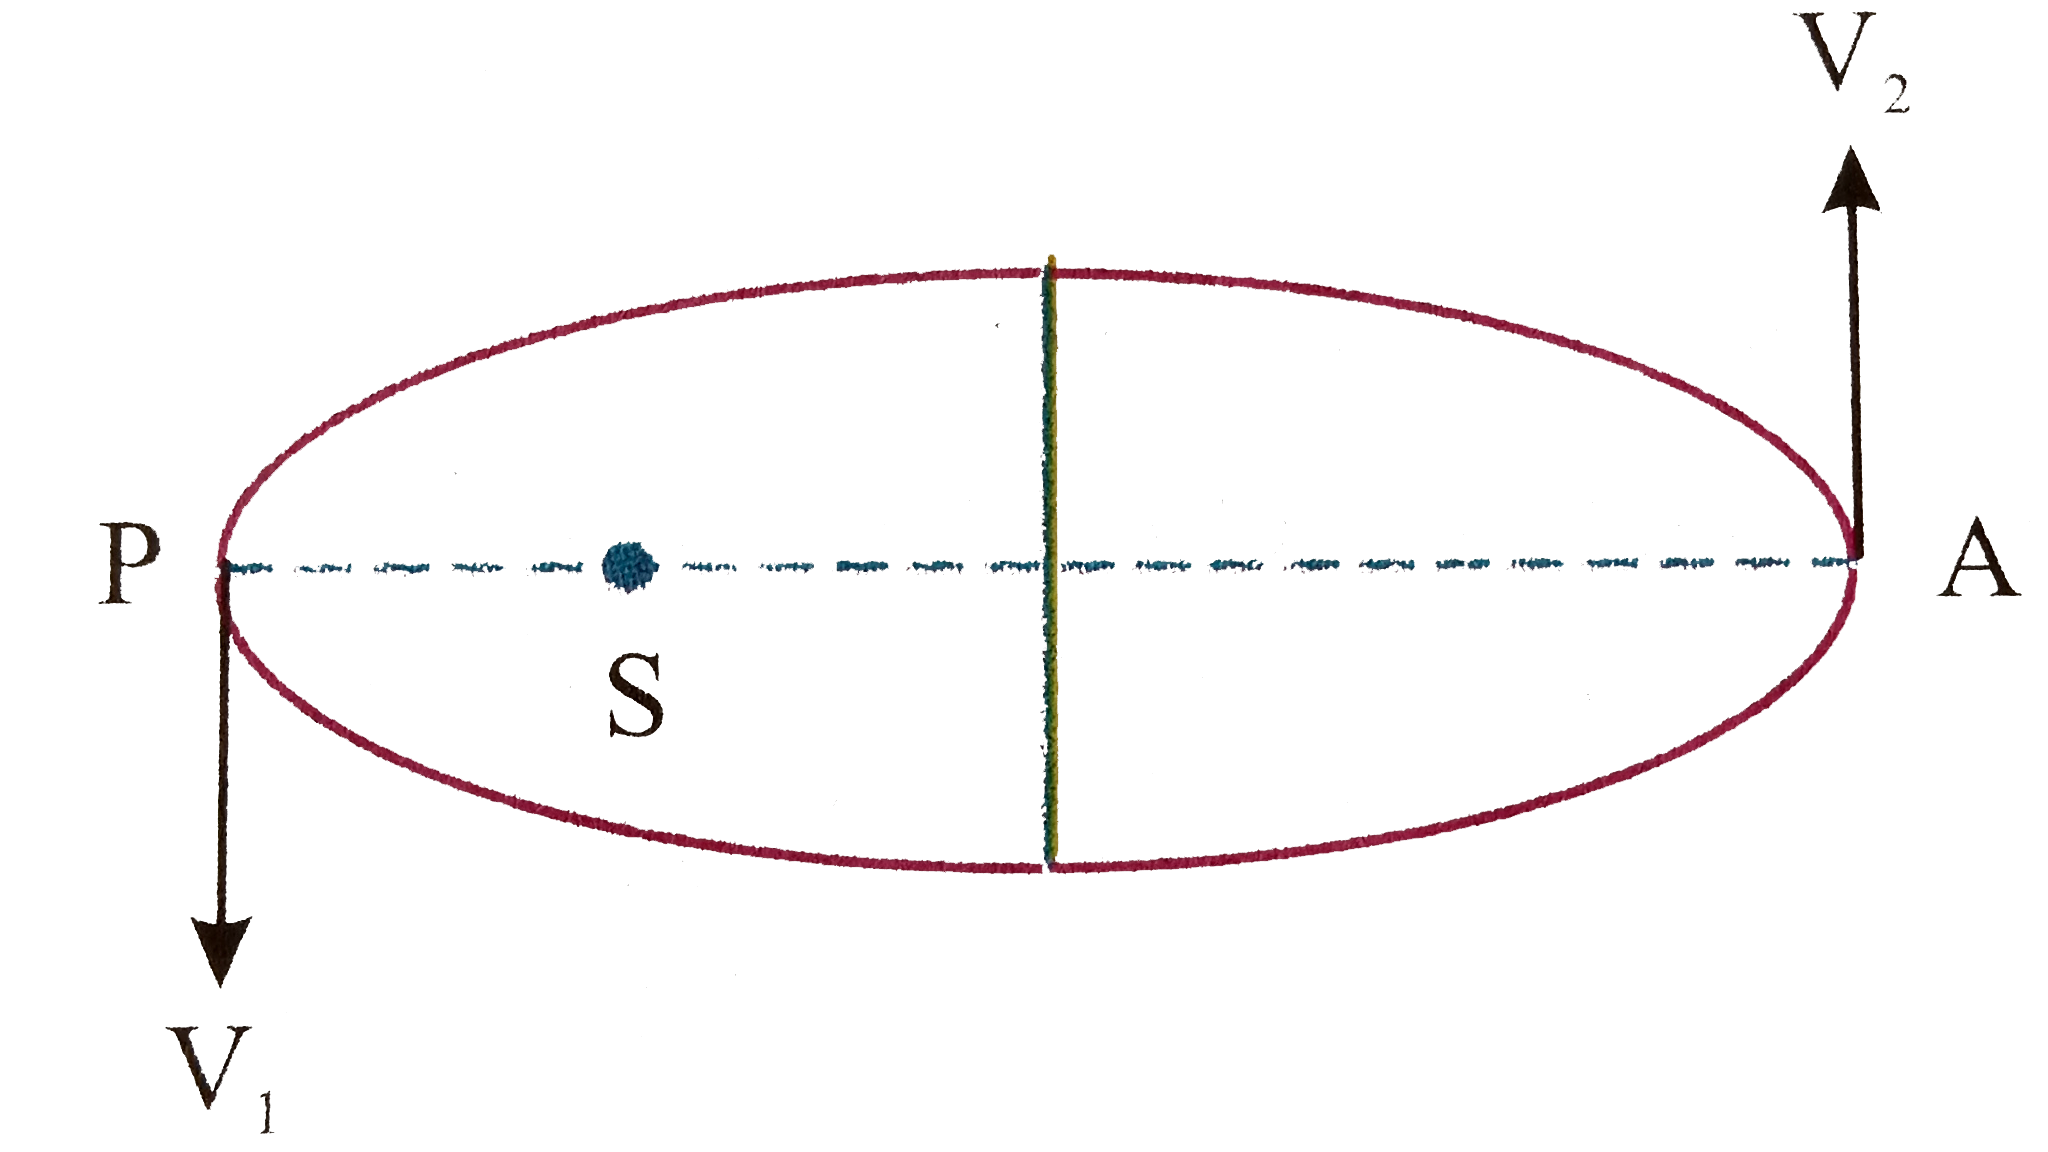 A planet of mass m is moving in an elliptical orbit around the sun of mass M. The semi major axis of its orbit is a, eccentricity is e.   Find speed of planet V(1) at perihelion P